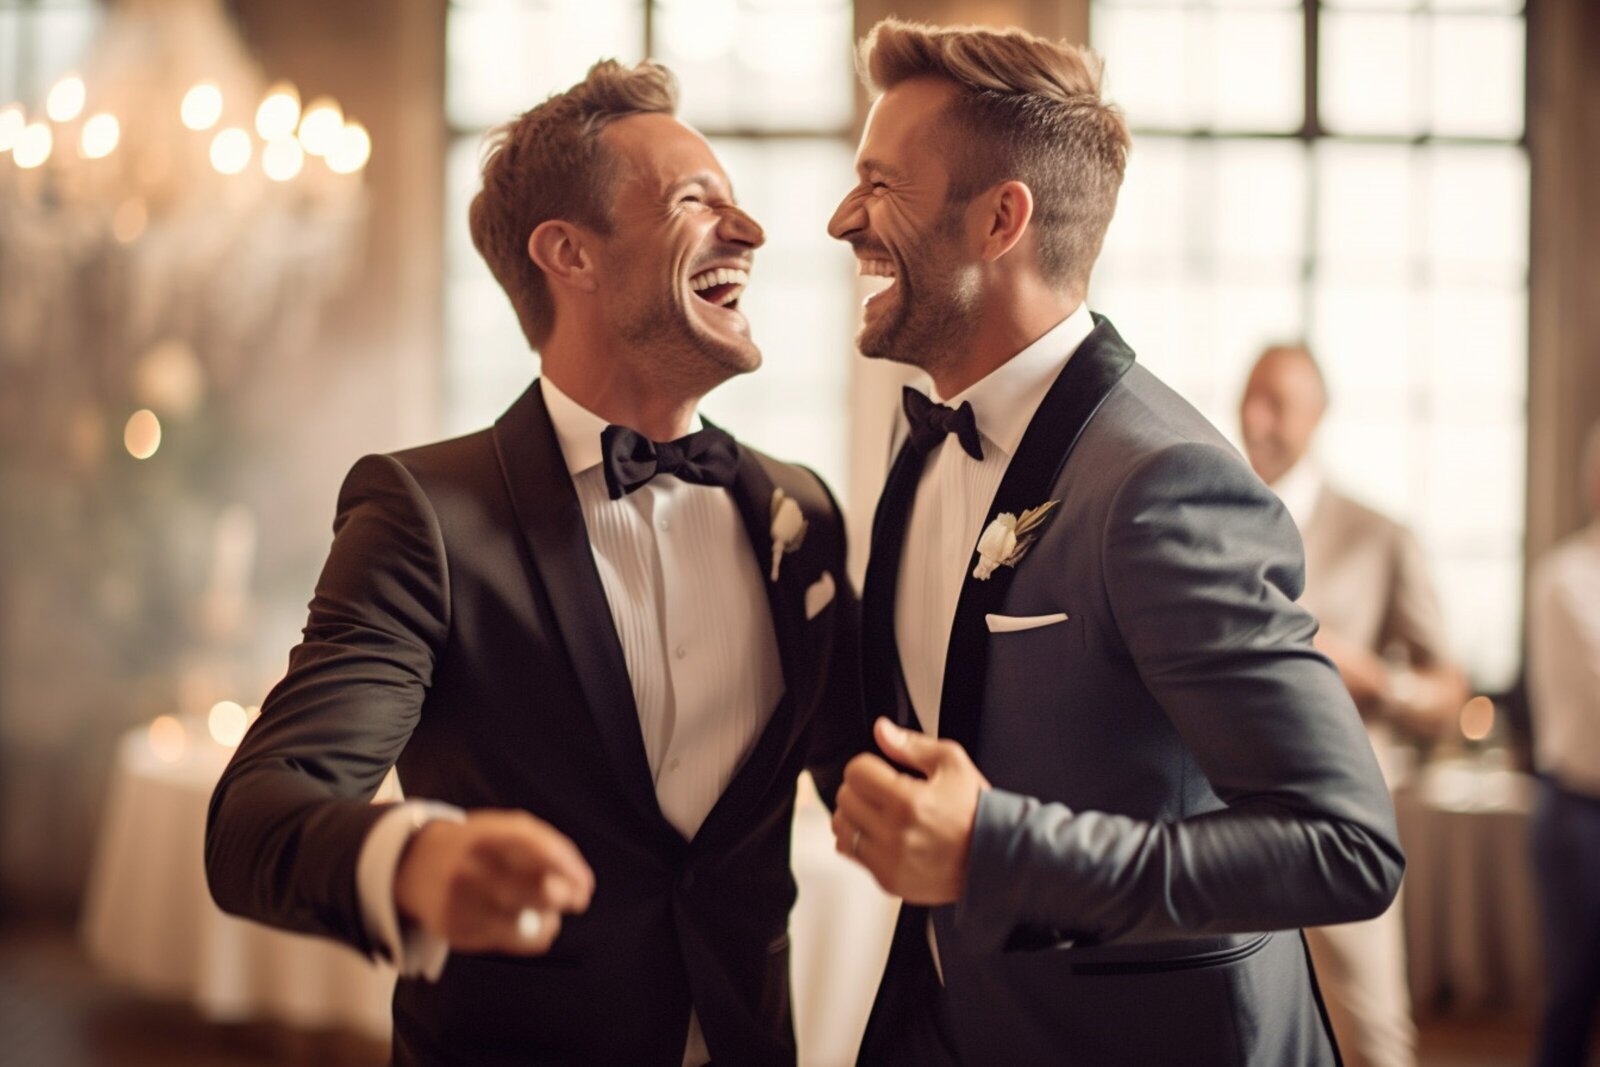 vecteezy_smiling-gay-couple-dancing-on-their-wedding-day_30644966